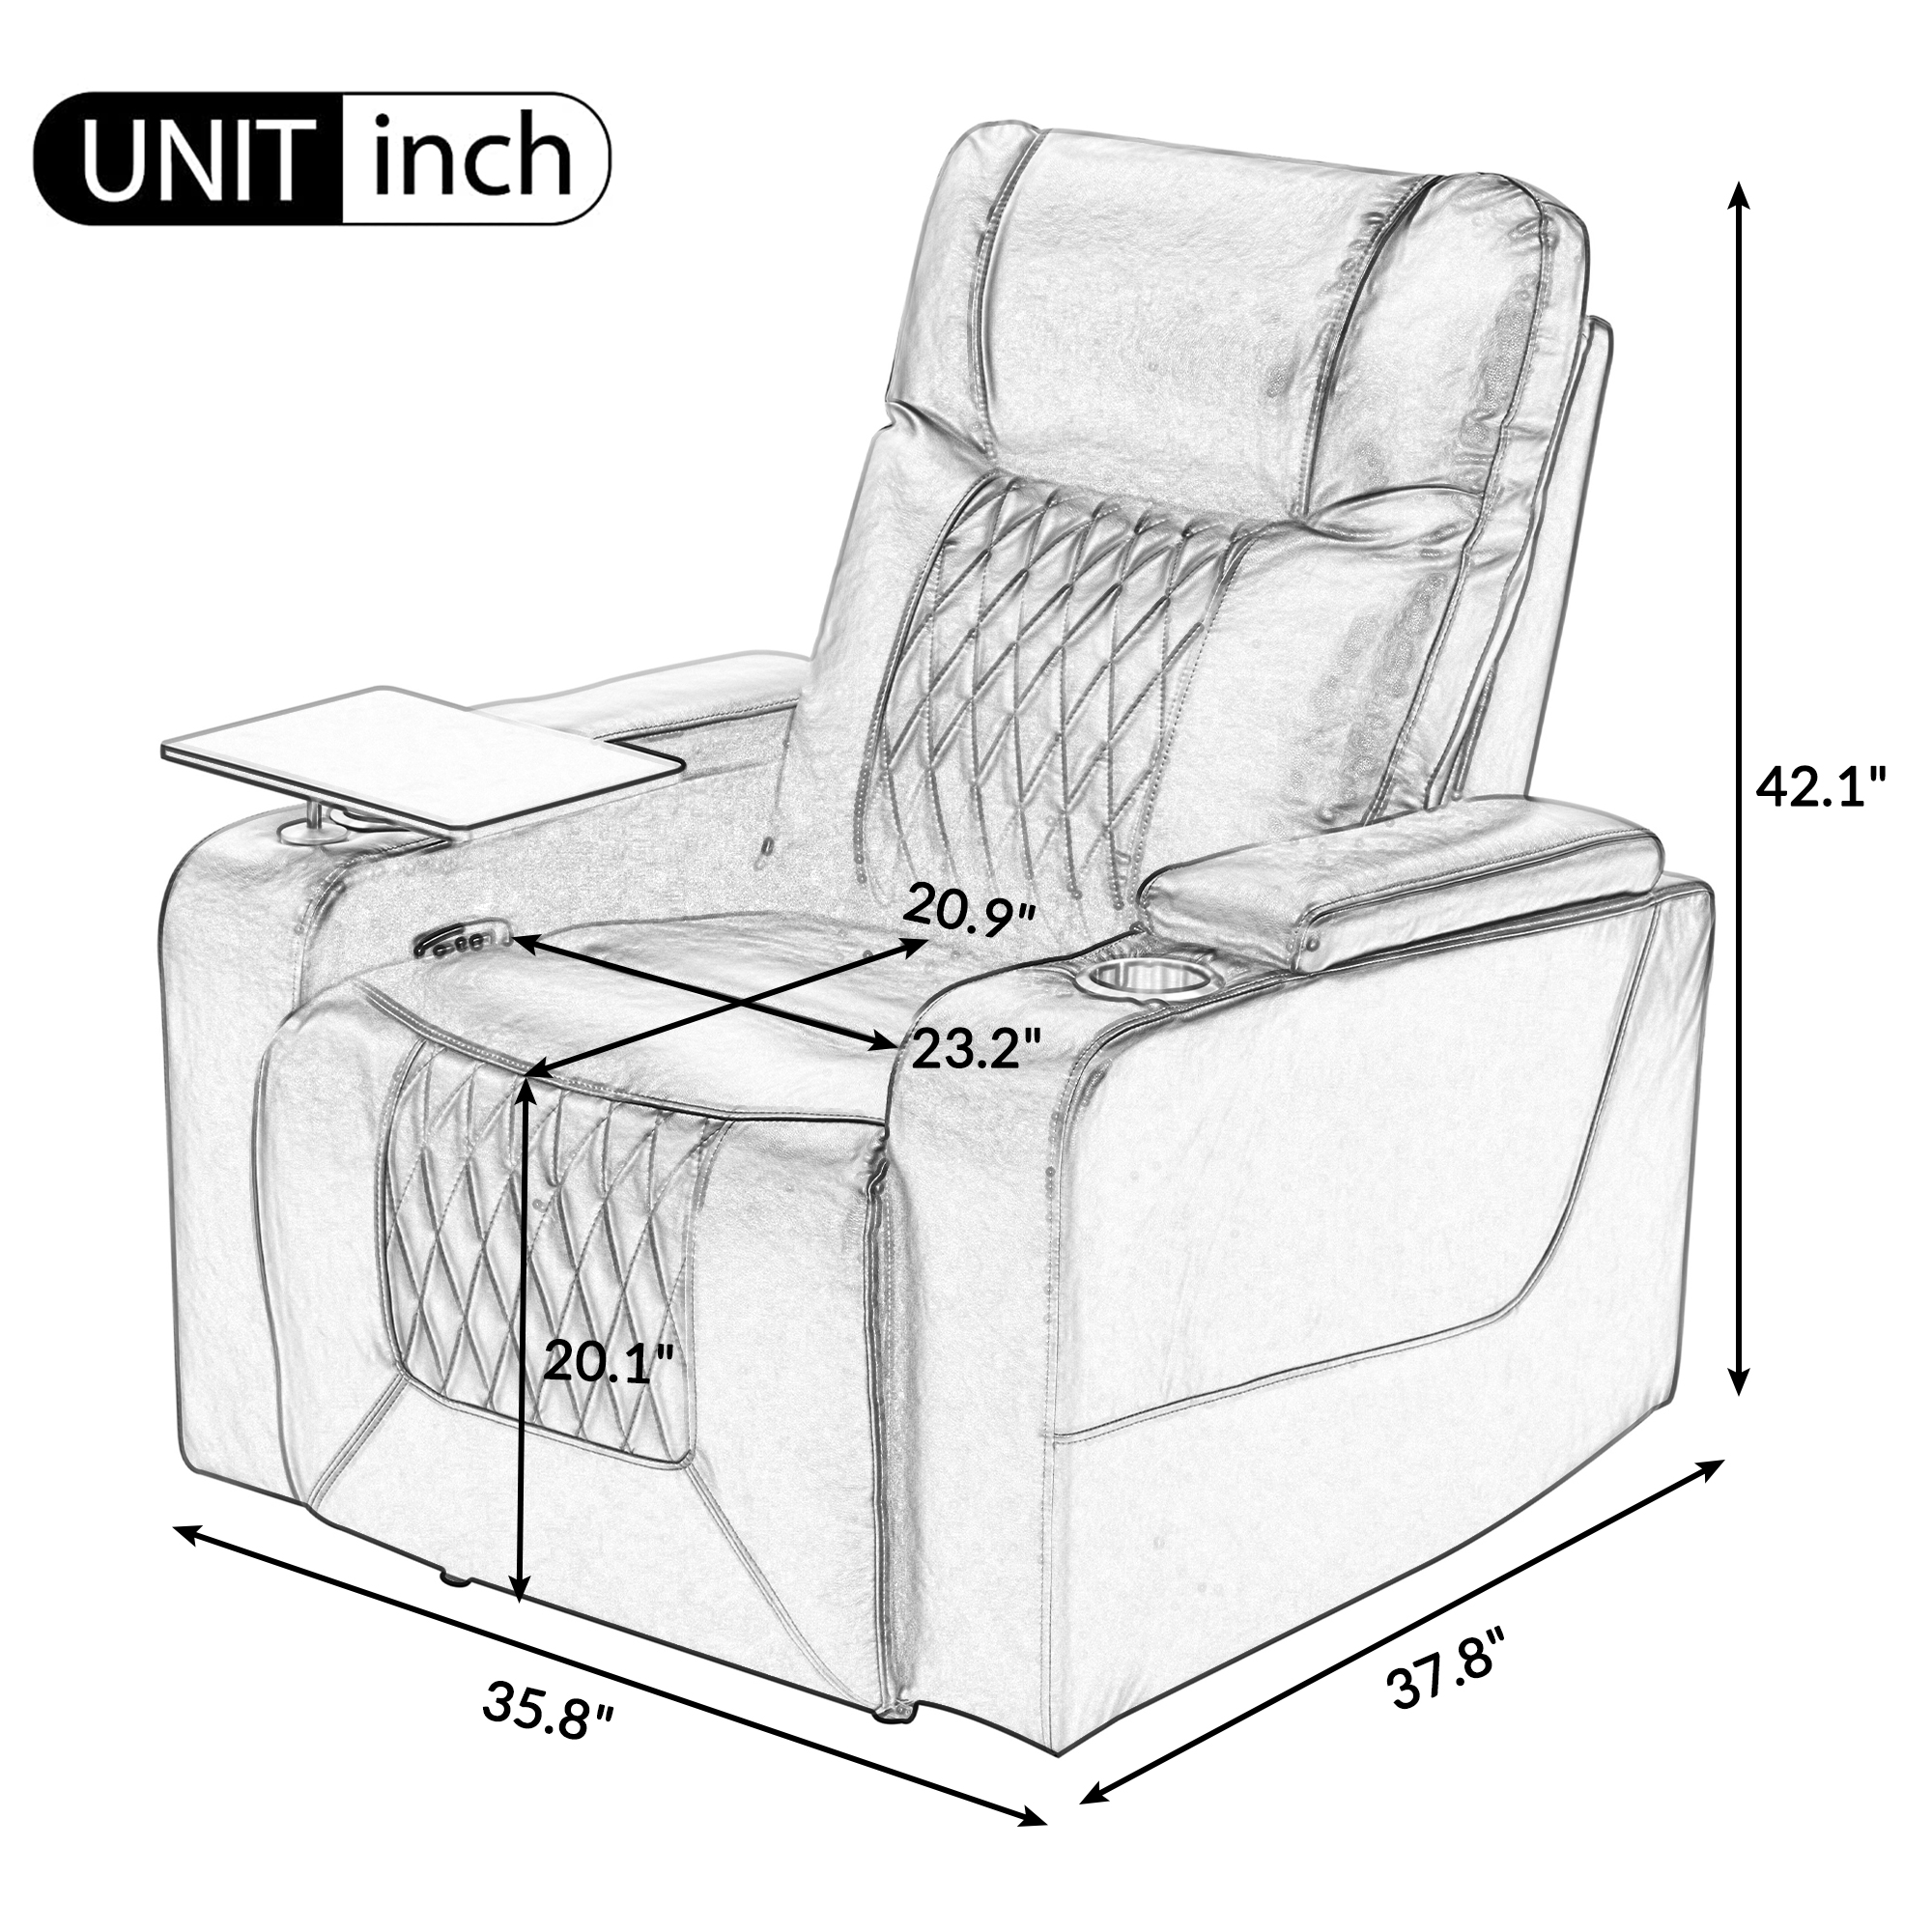 Power Recliner with USB Charging Port and Arm Storage - SG000630AAD